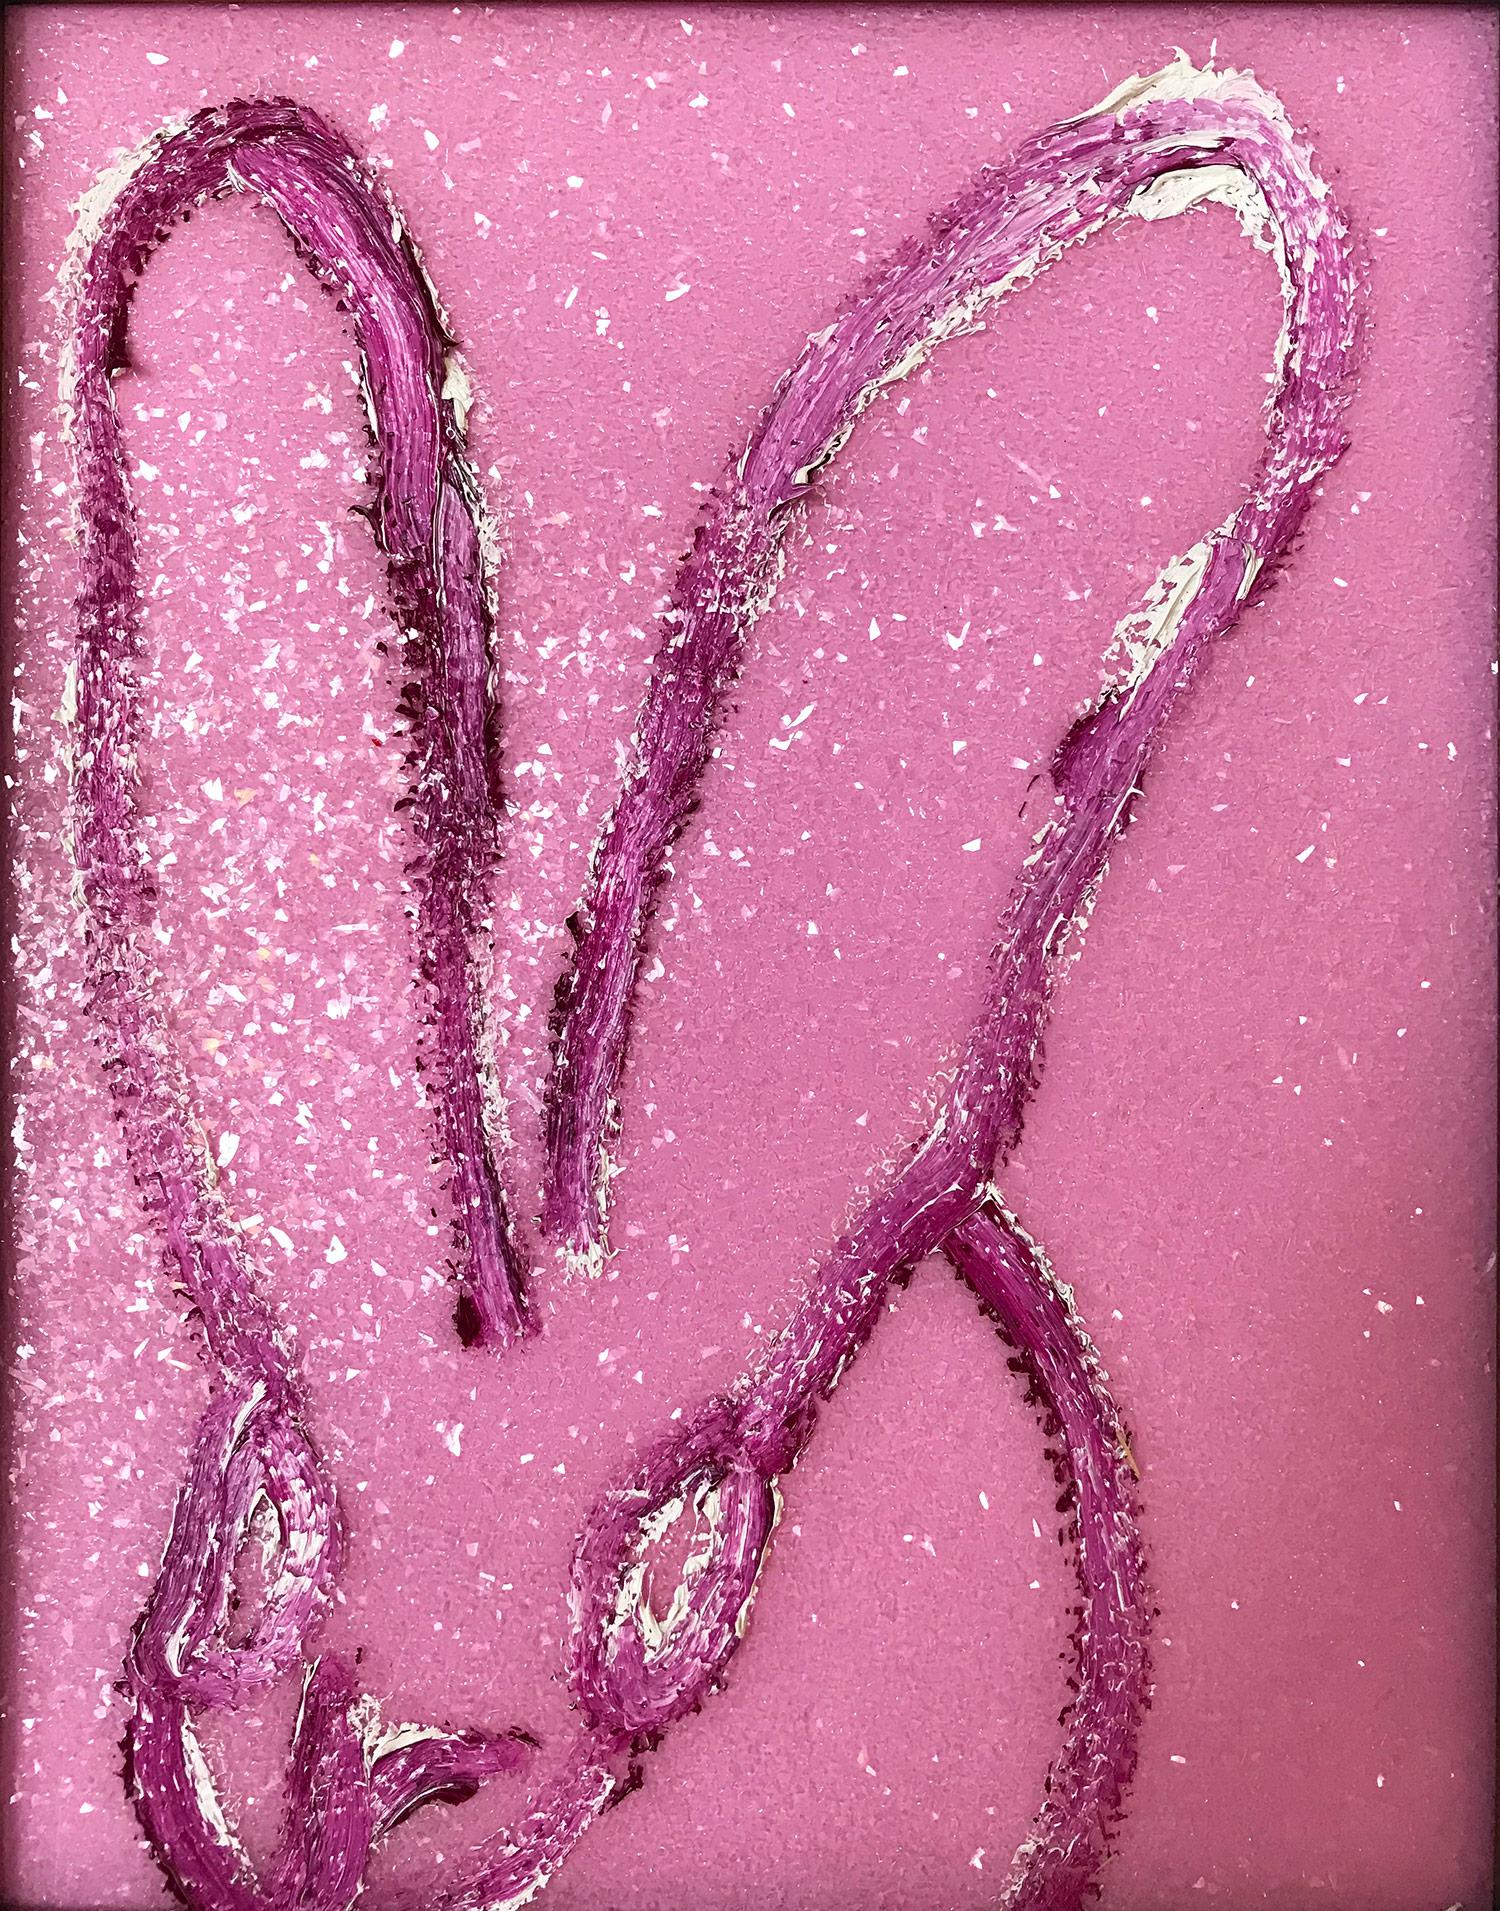 Untitled (Bunny on Pink Diamond Dust) - Contemporary Painting by Hunt Slonem